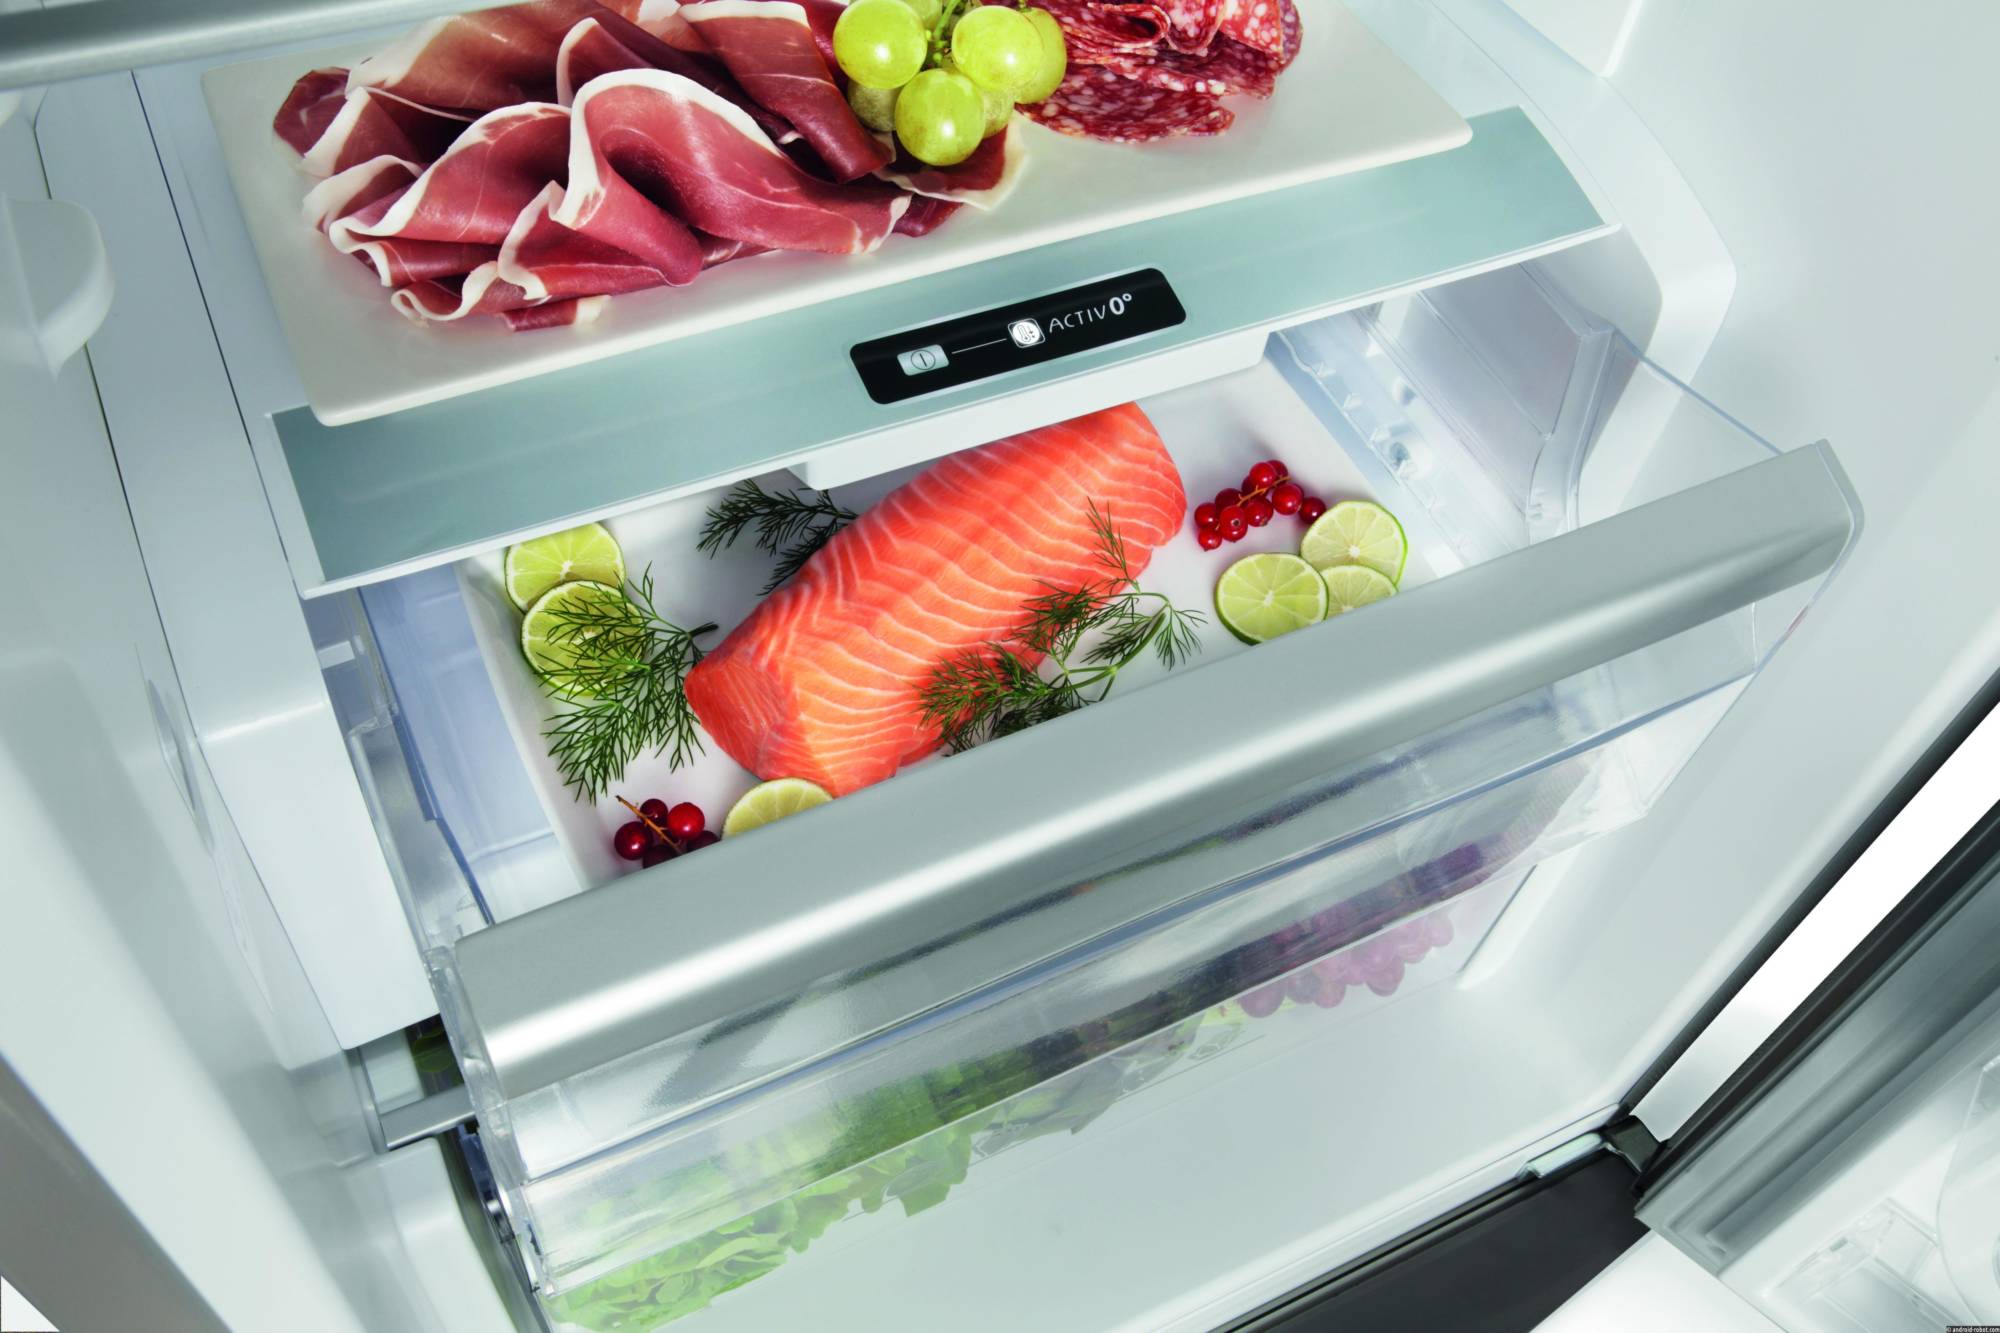 compartment for freezing in the refrigerator